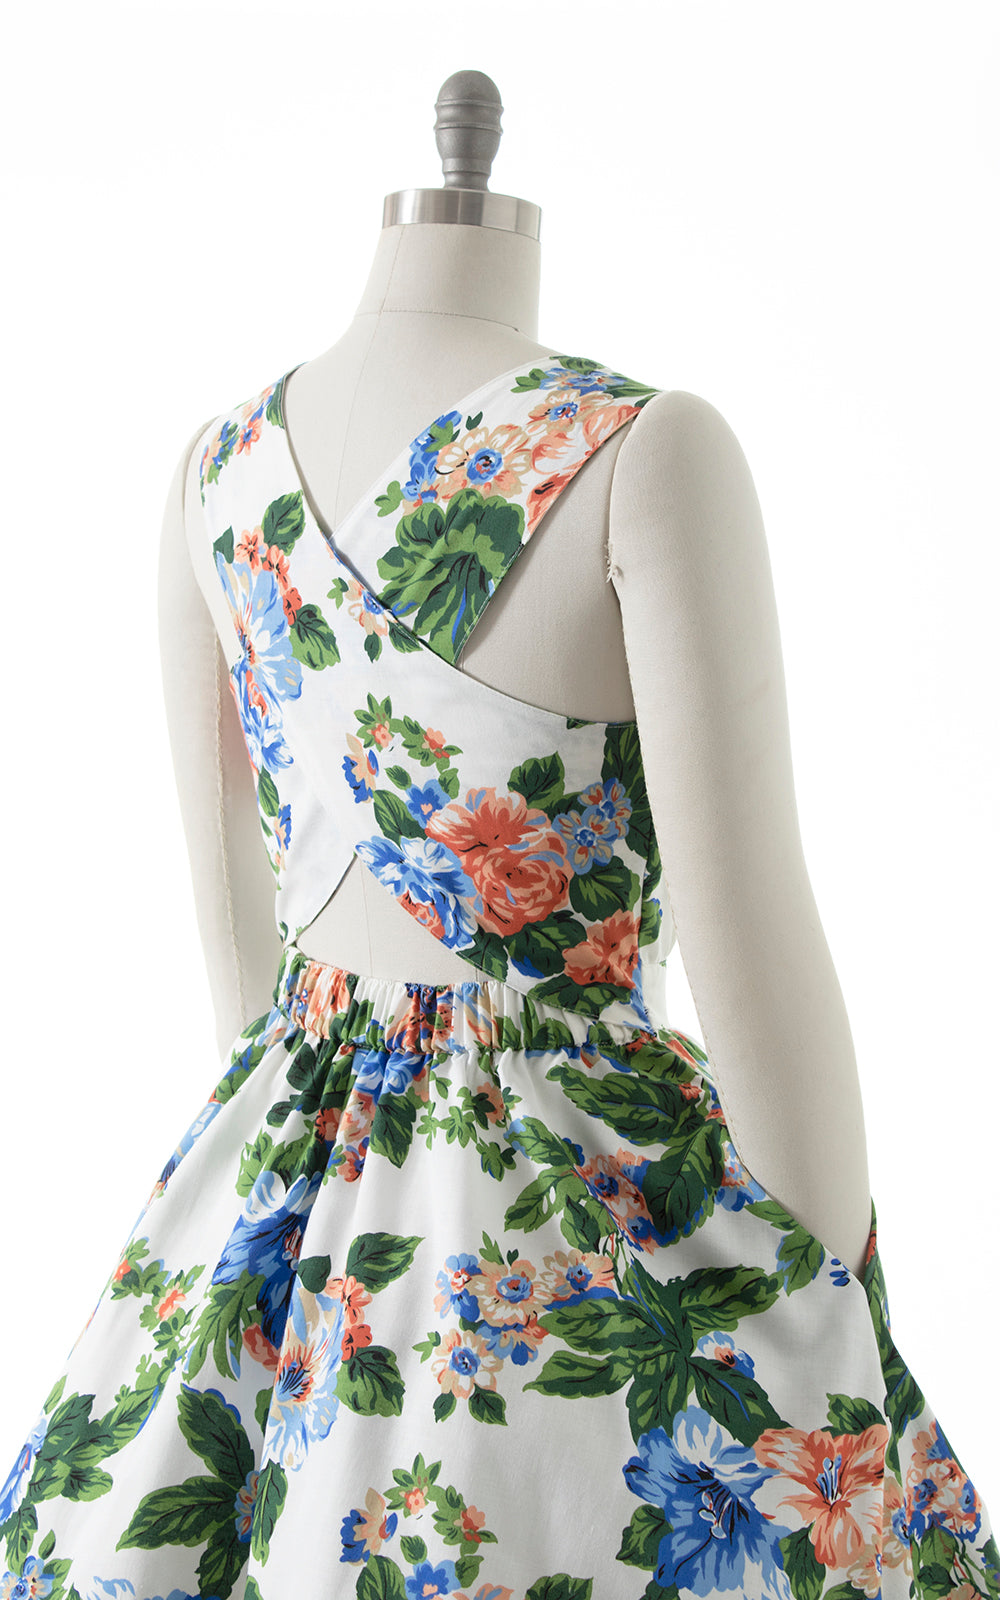 1980s CAROL ANDERSON Floral Criss-Cross Back Dress with Pockets | medium/large